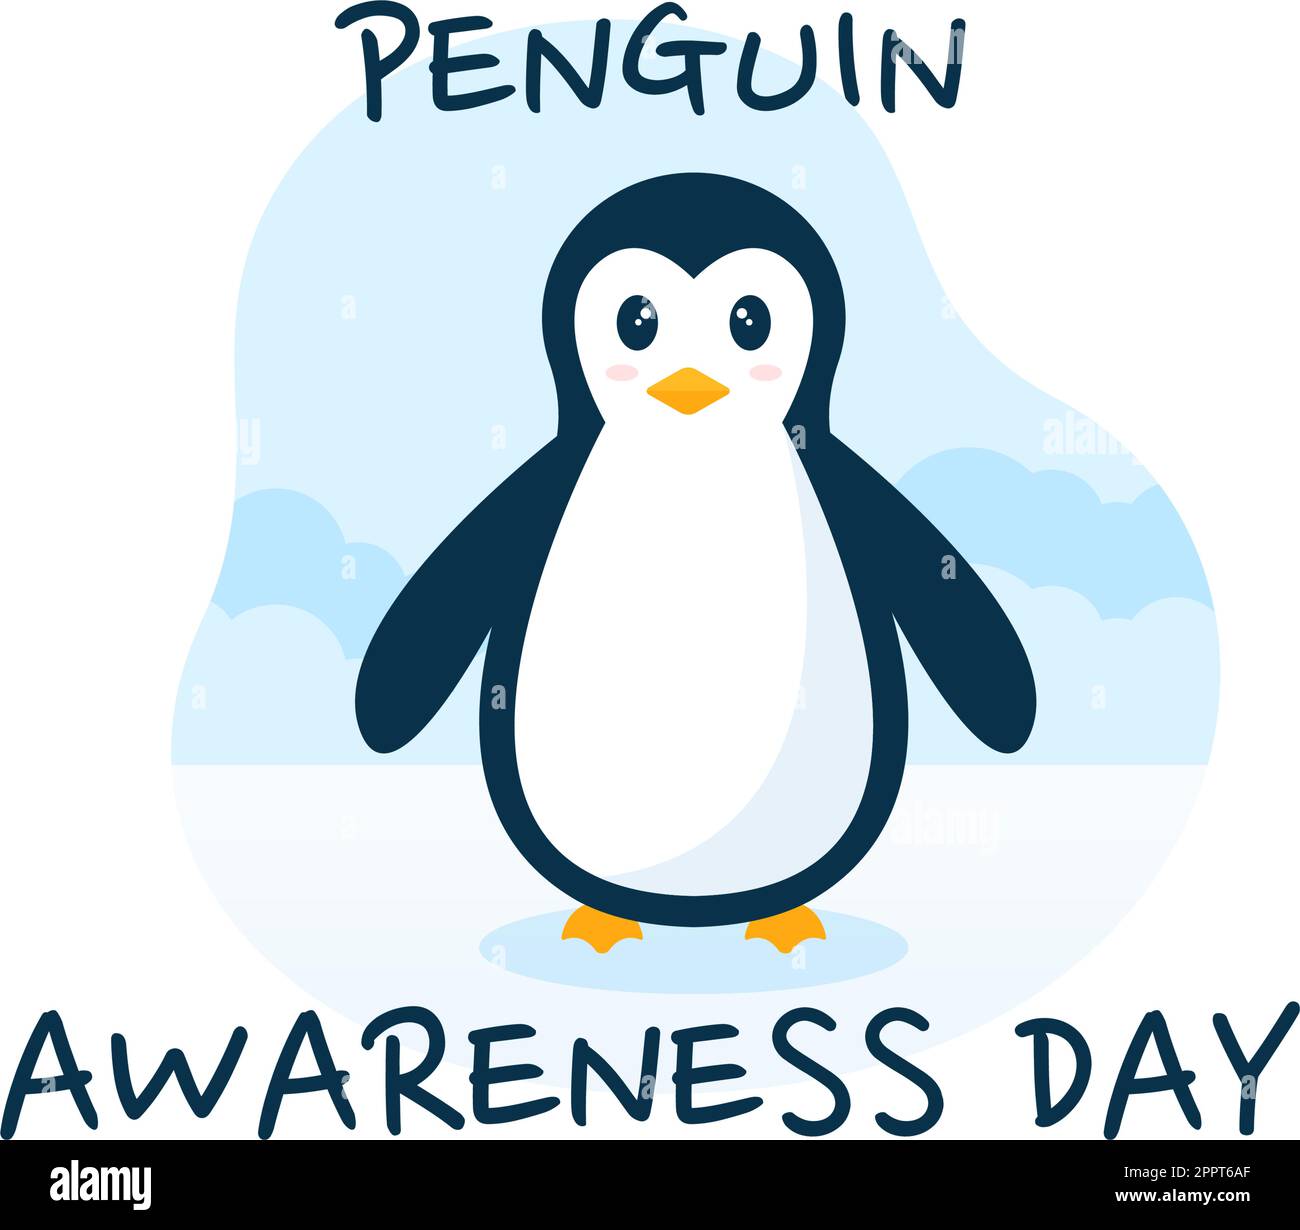 Happy Penguin Awareness Day on January 20th to Maintain the Penguins ...